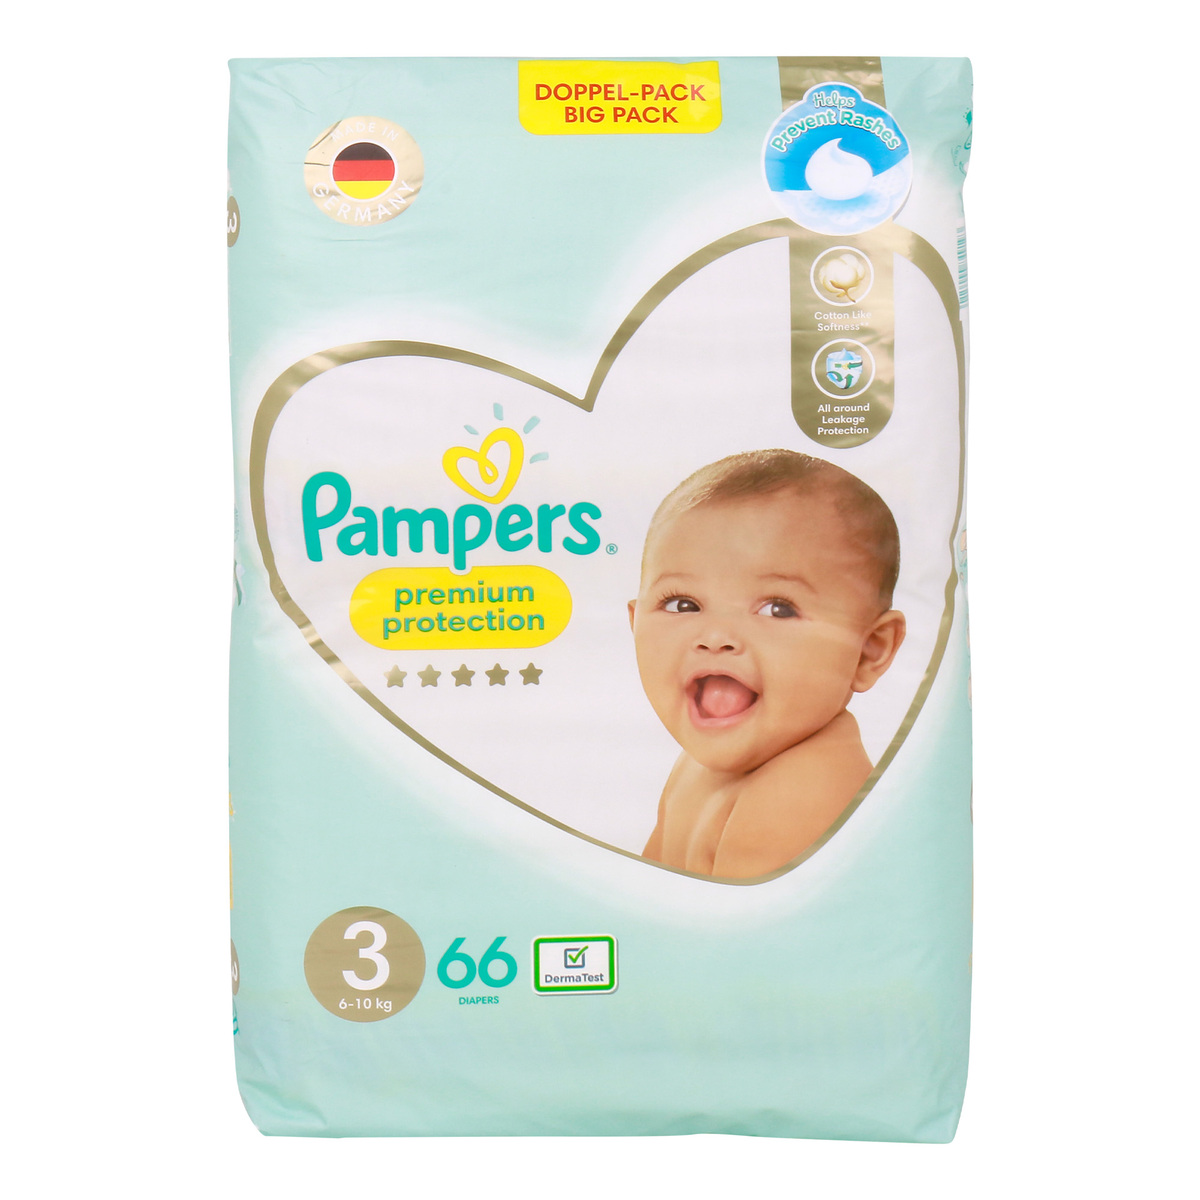 Buy Pampers Premium Baby Diapers Size 3, 6-10kg 66pcs Online at Best Price | Baby Nappies | Lulu Kuwait in Kuwait